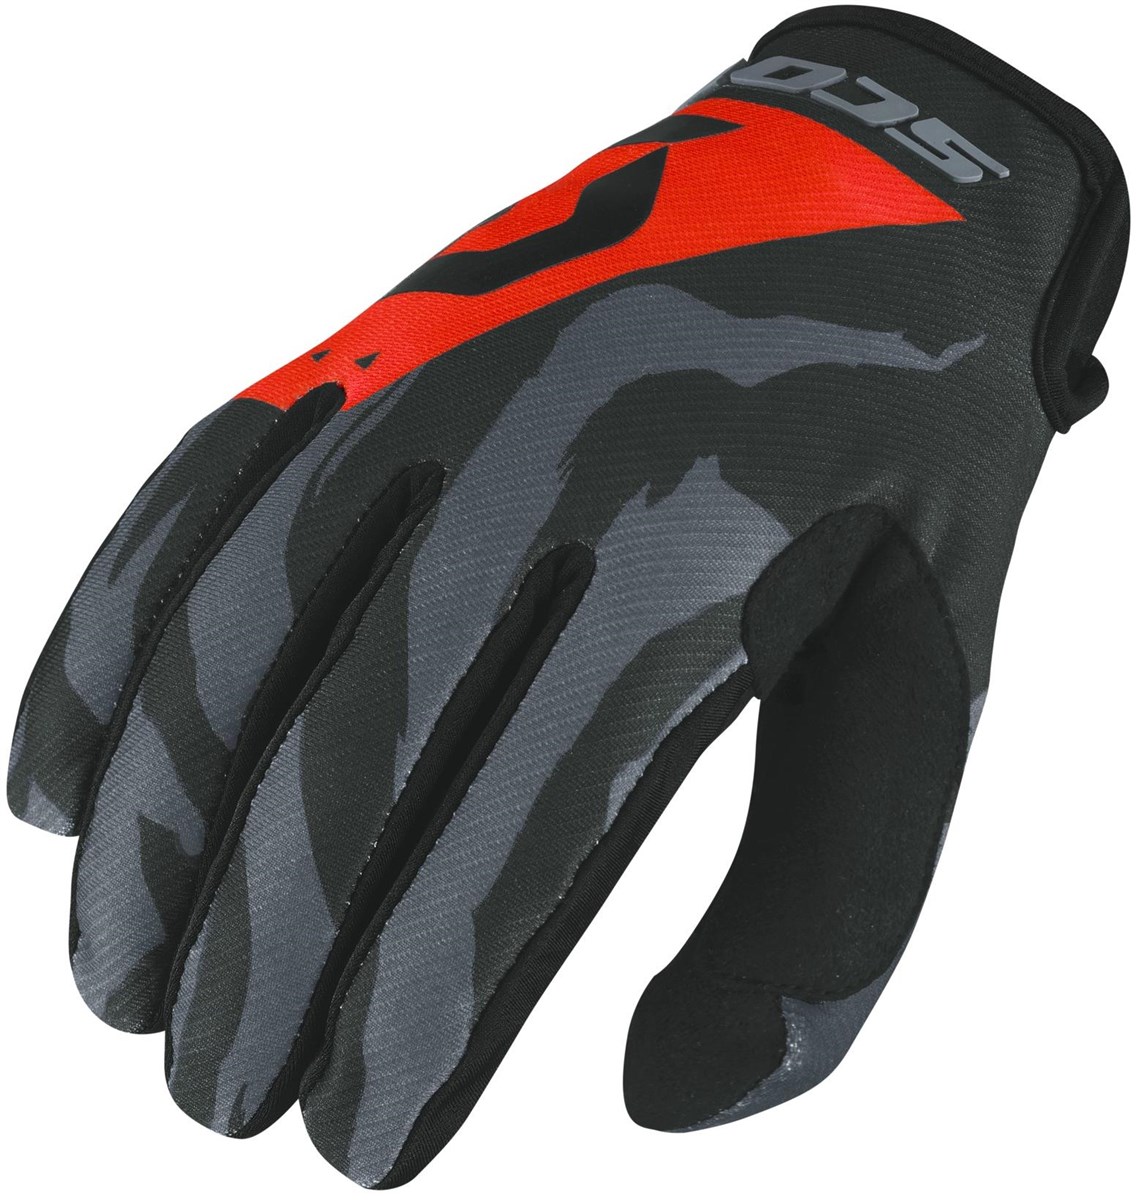 Scott 350 Race Junior Long Finger Cycling Gloves product image